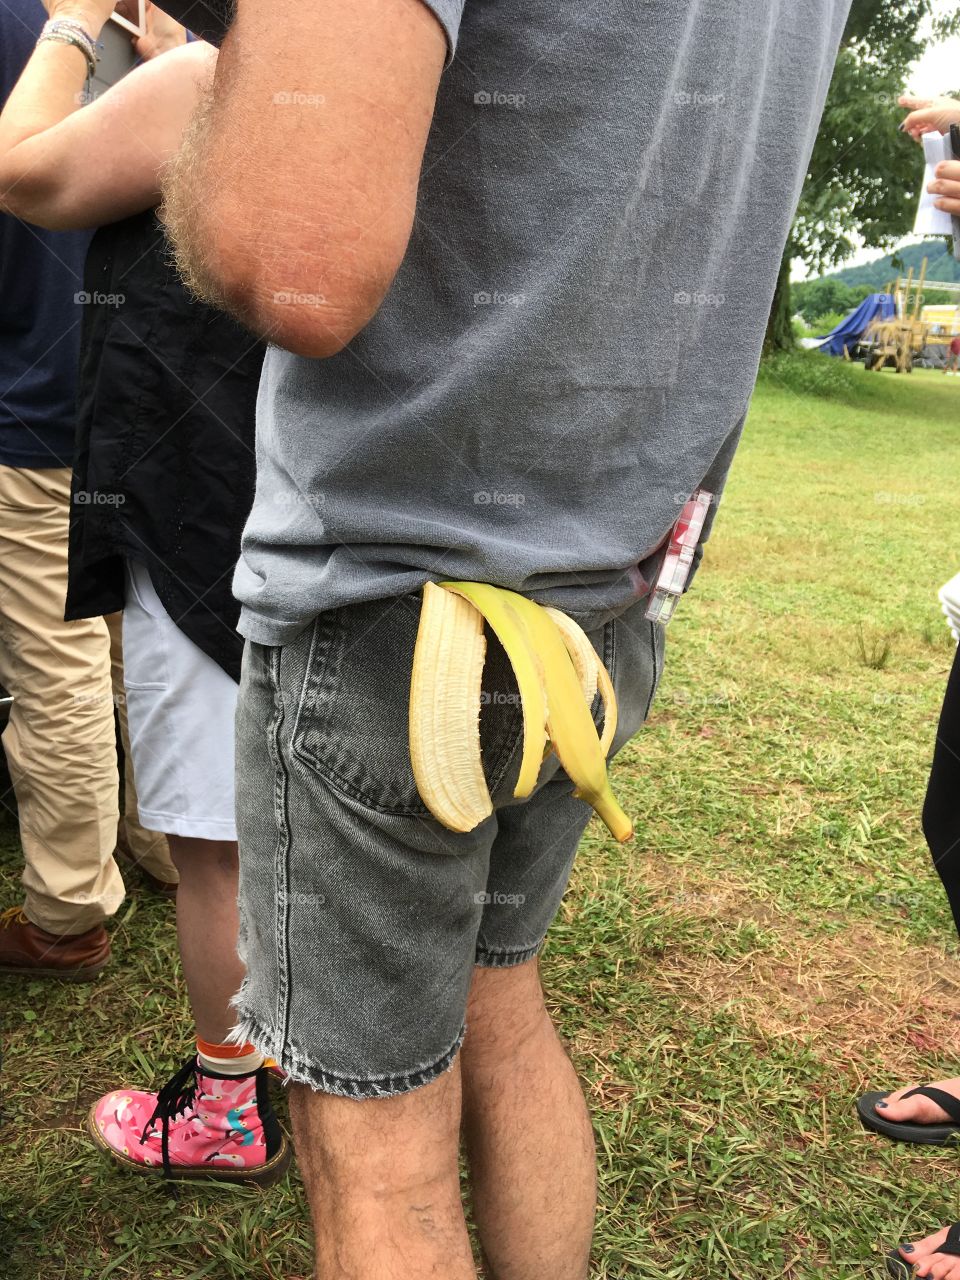 Is that a banana in your back pocket or are you just happy to see me?